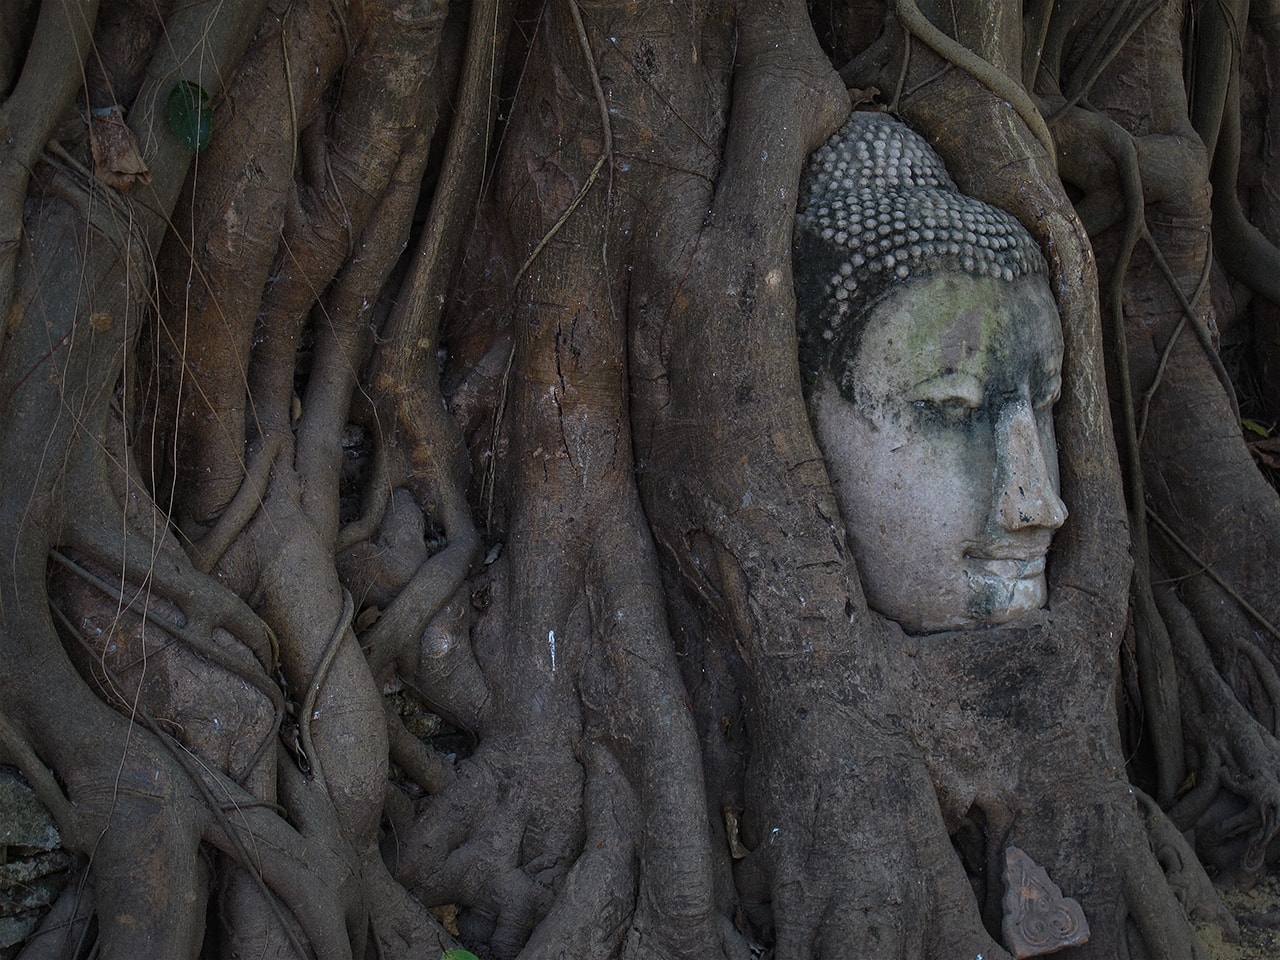 Buddha structure in a tree